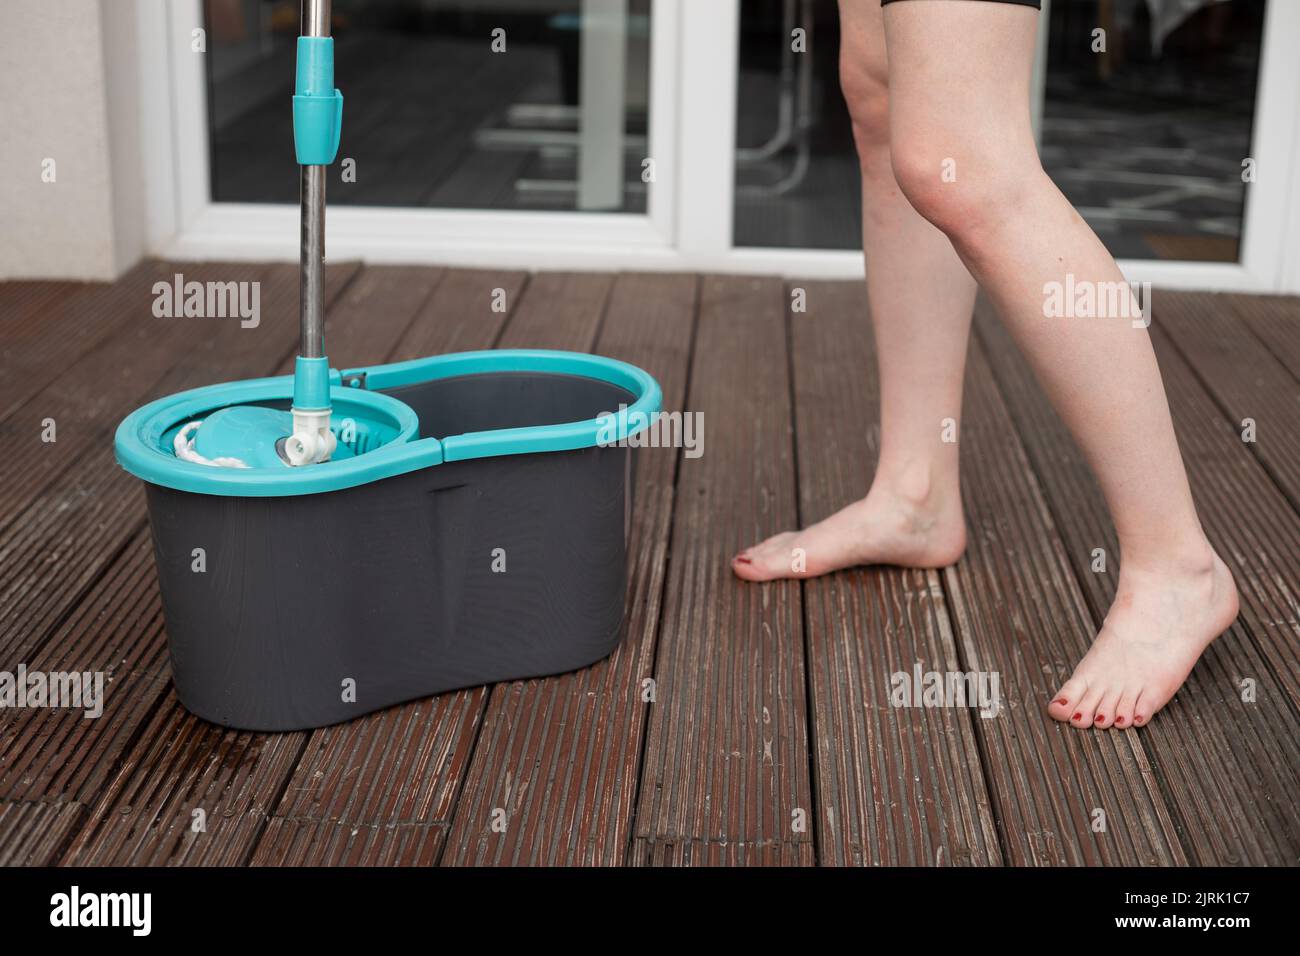 https://c8.alamy.com/comp/2JRK1C7/cropped-photo-of-young-barefoot-woman-holding-spin-mop-over-grey-plastic-bucket-cleaning-wooden-floor-of-veranda-2JRK1C7.jpg